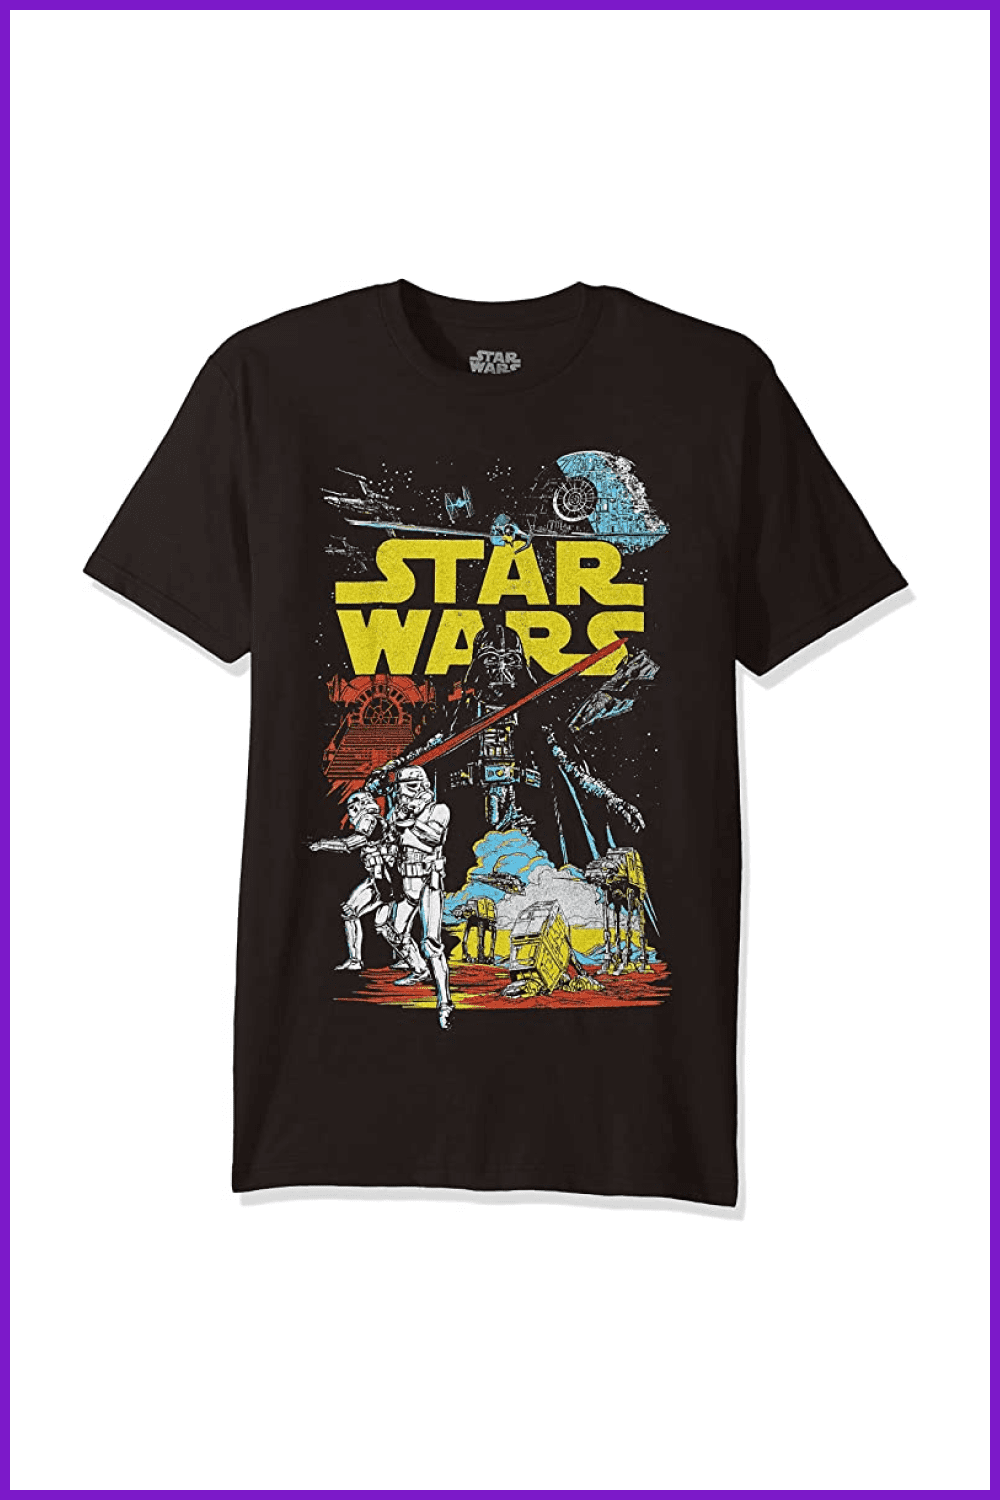 T-shirt with AT-AT, Darth Vader, Death Star, Millennium Falcon, Stormtropper, and X-Wing.